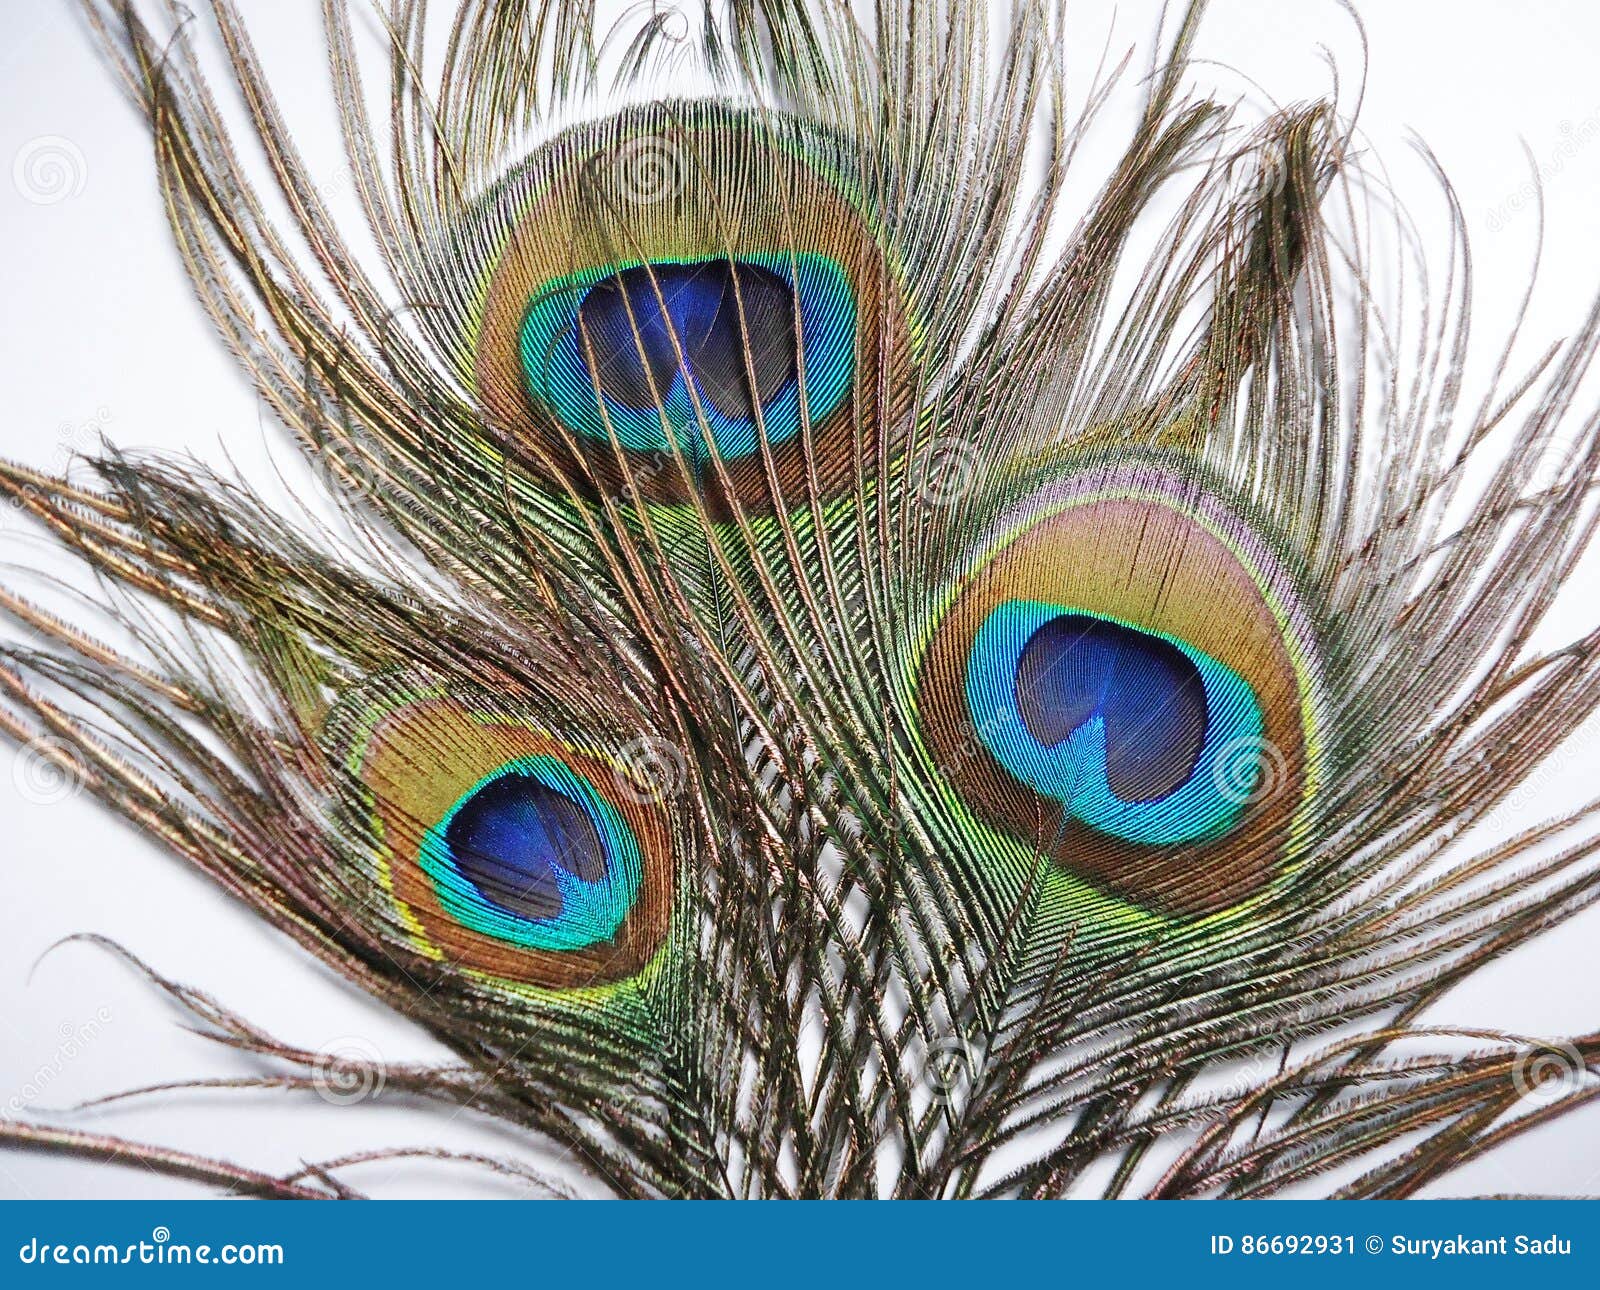 Feathers of Peacock or Peahen Stock Image - Image of peahen, feather ...